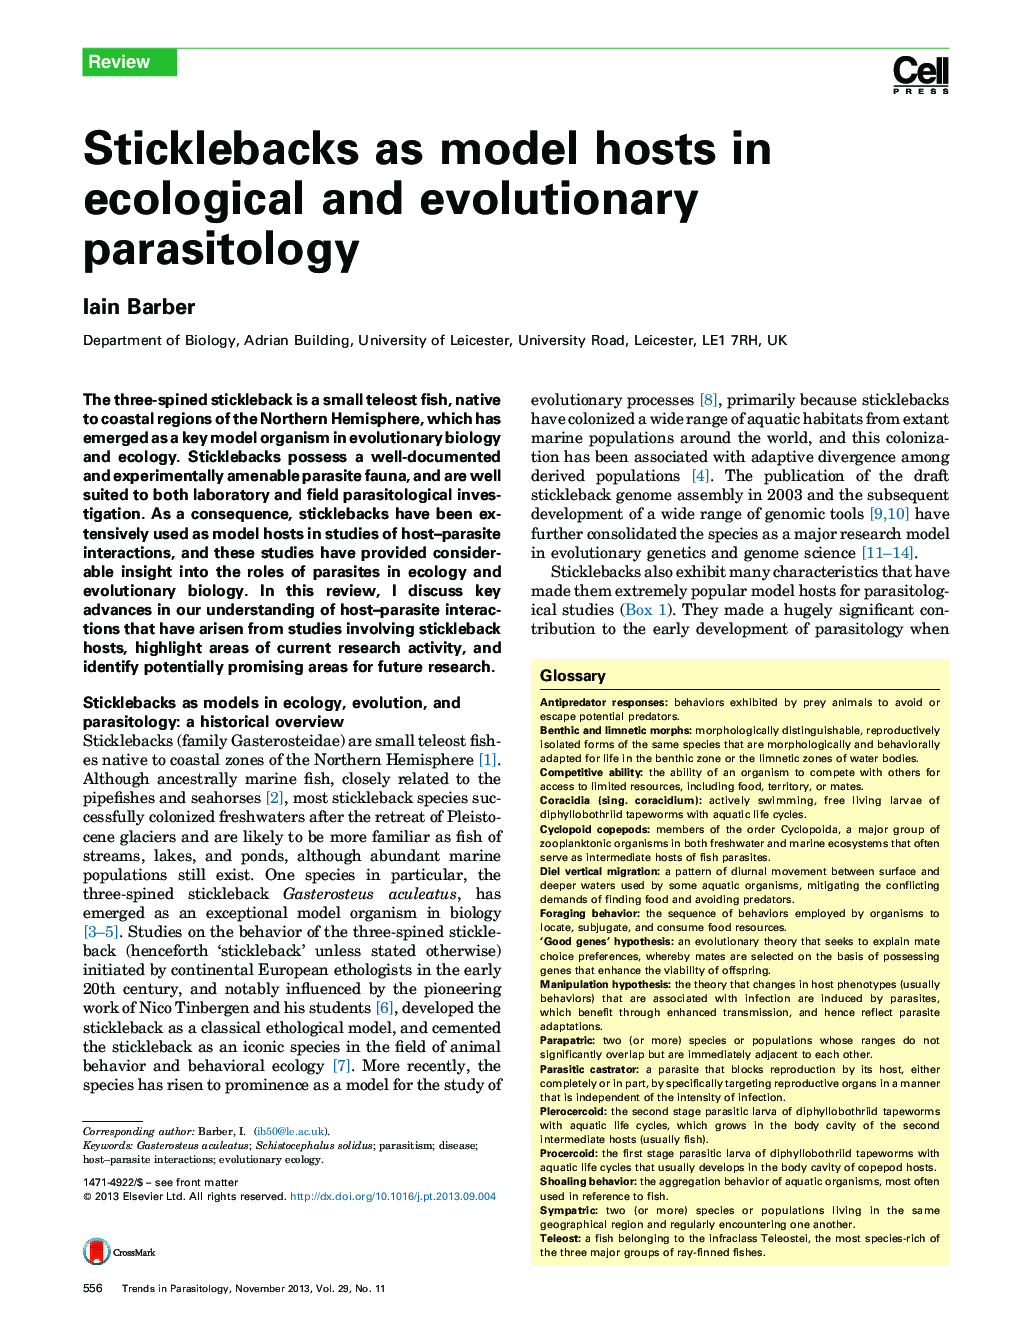 Sticklebacks as model hosts in ecological and evolutionary parasitology